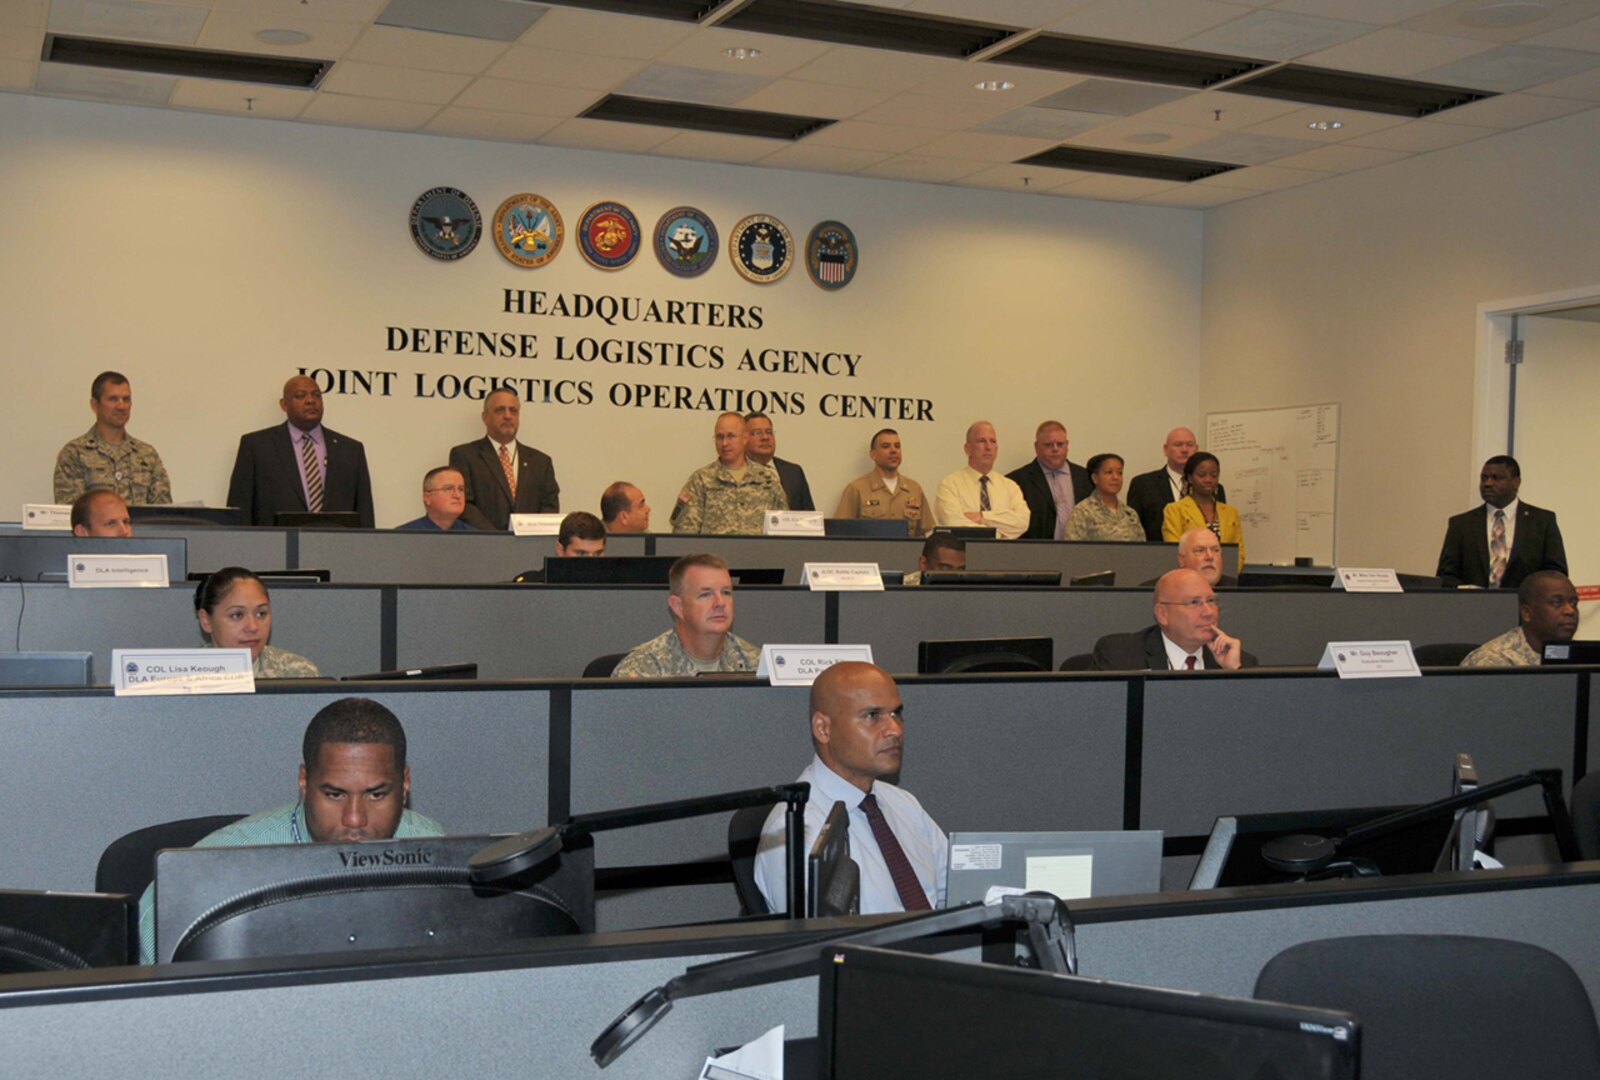 The Joint Logistics Operations Center is DLA’s full-time coordination point for global logistics activities.